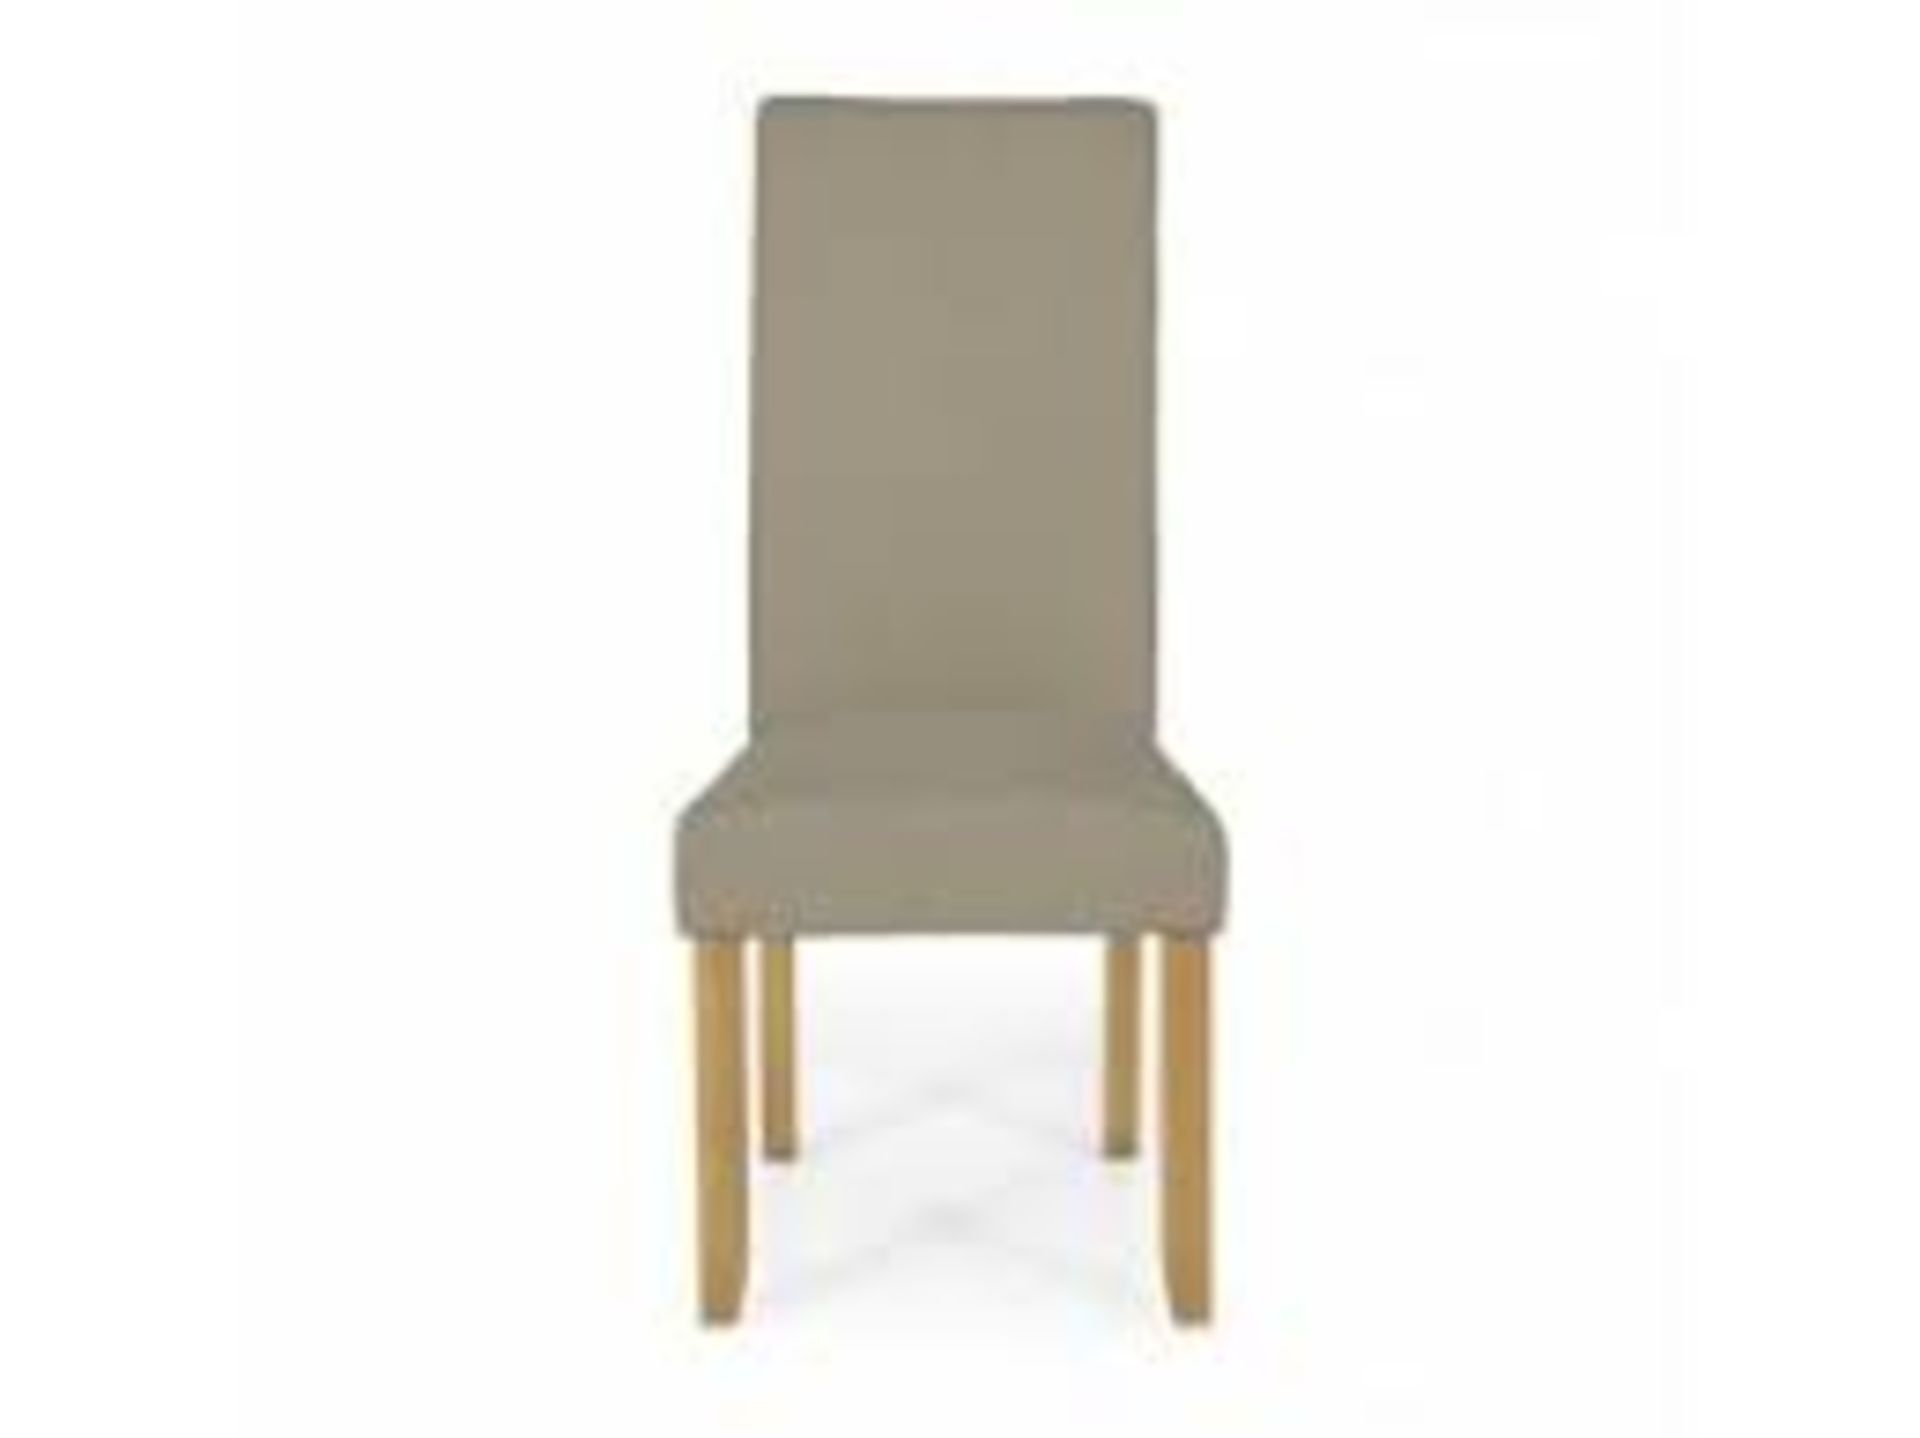 Boxed Serene Set Of 2 Marlow Upholstered Dining Chairs RRP £200 (Pictures Are For Illustration